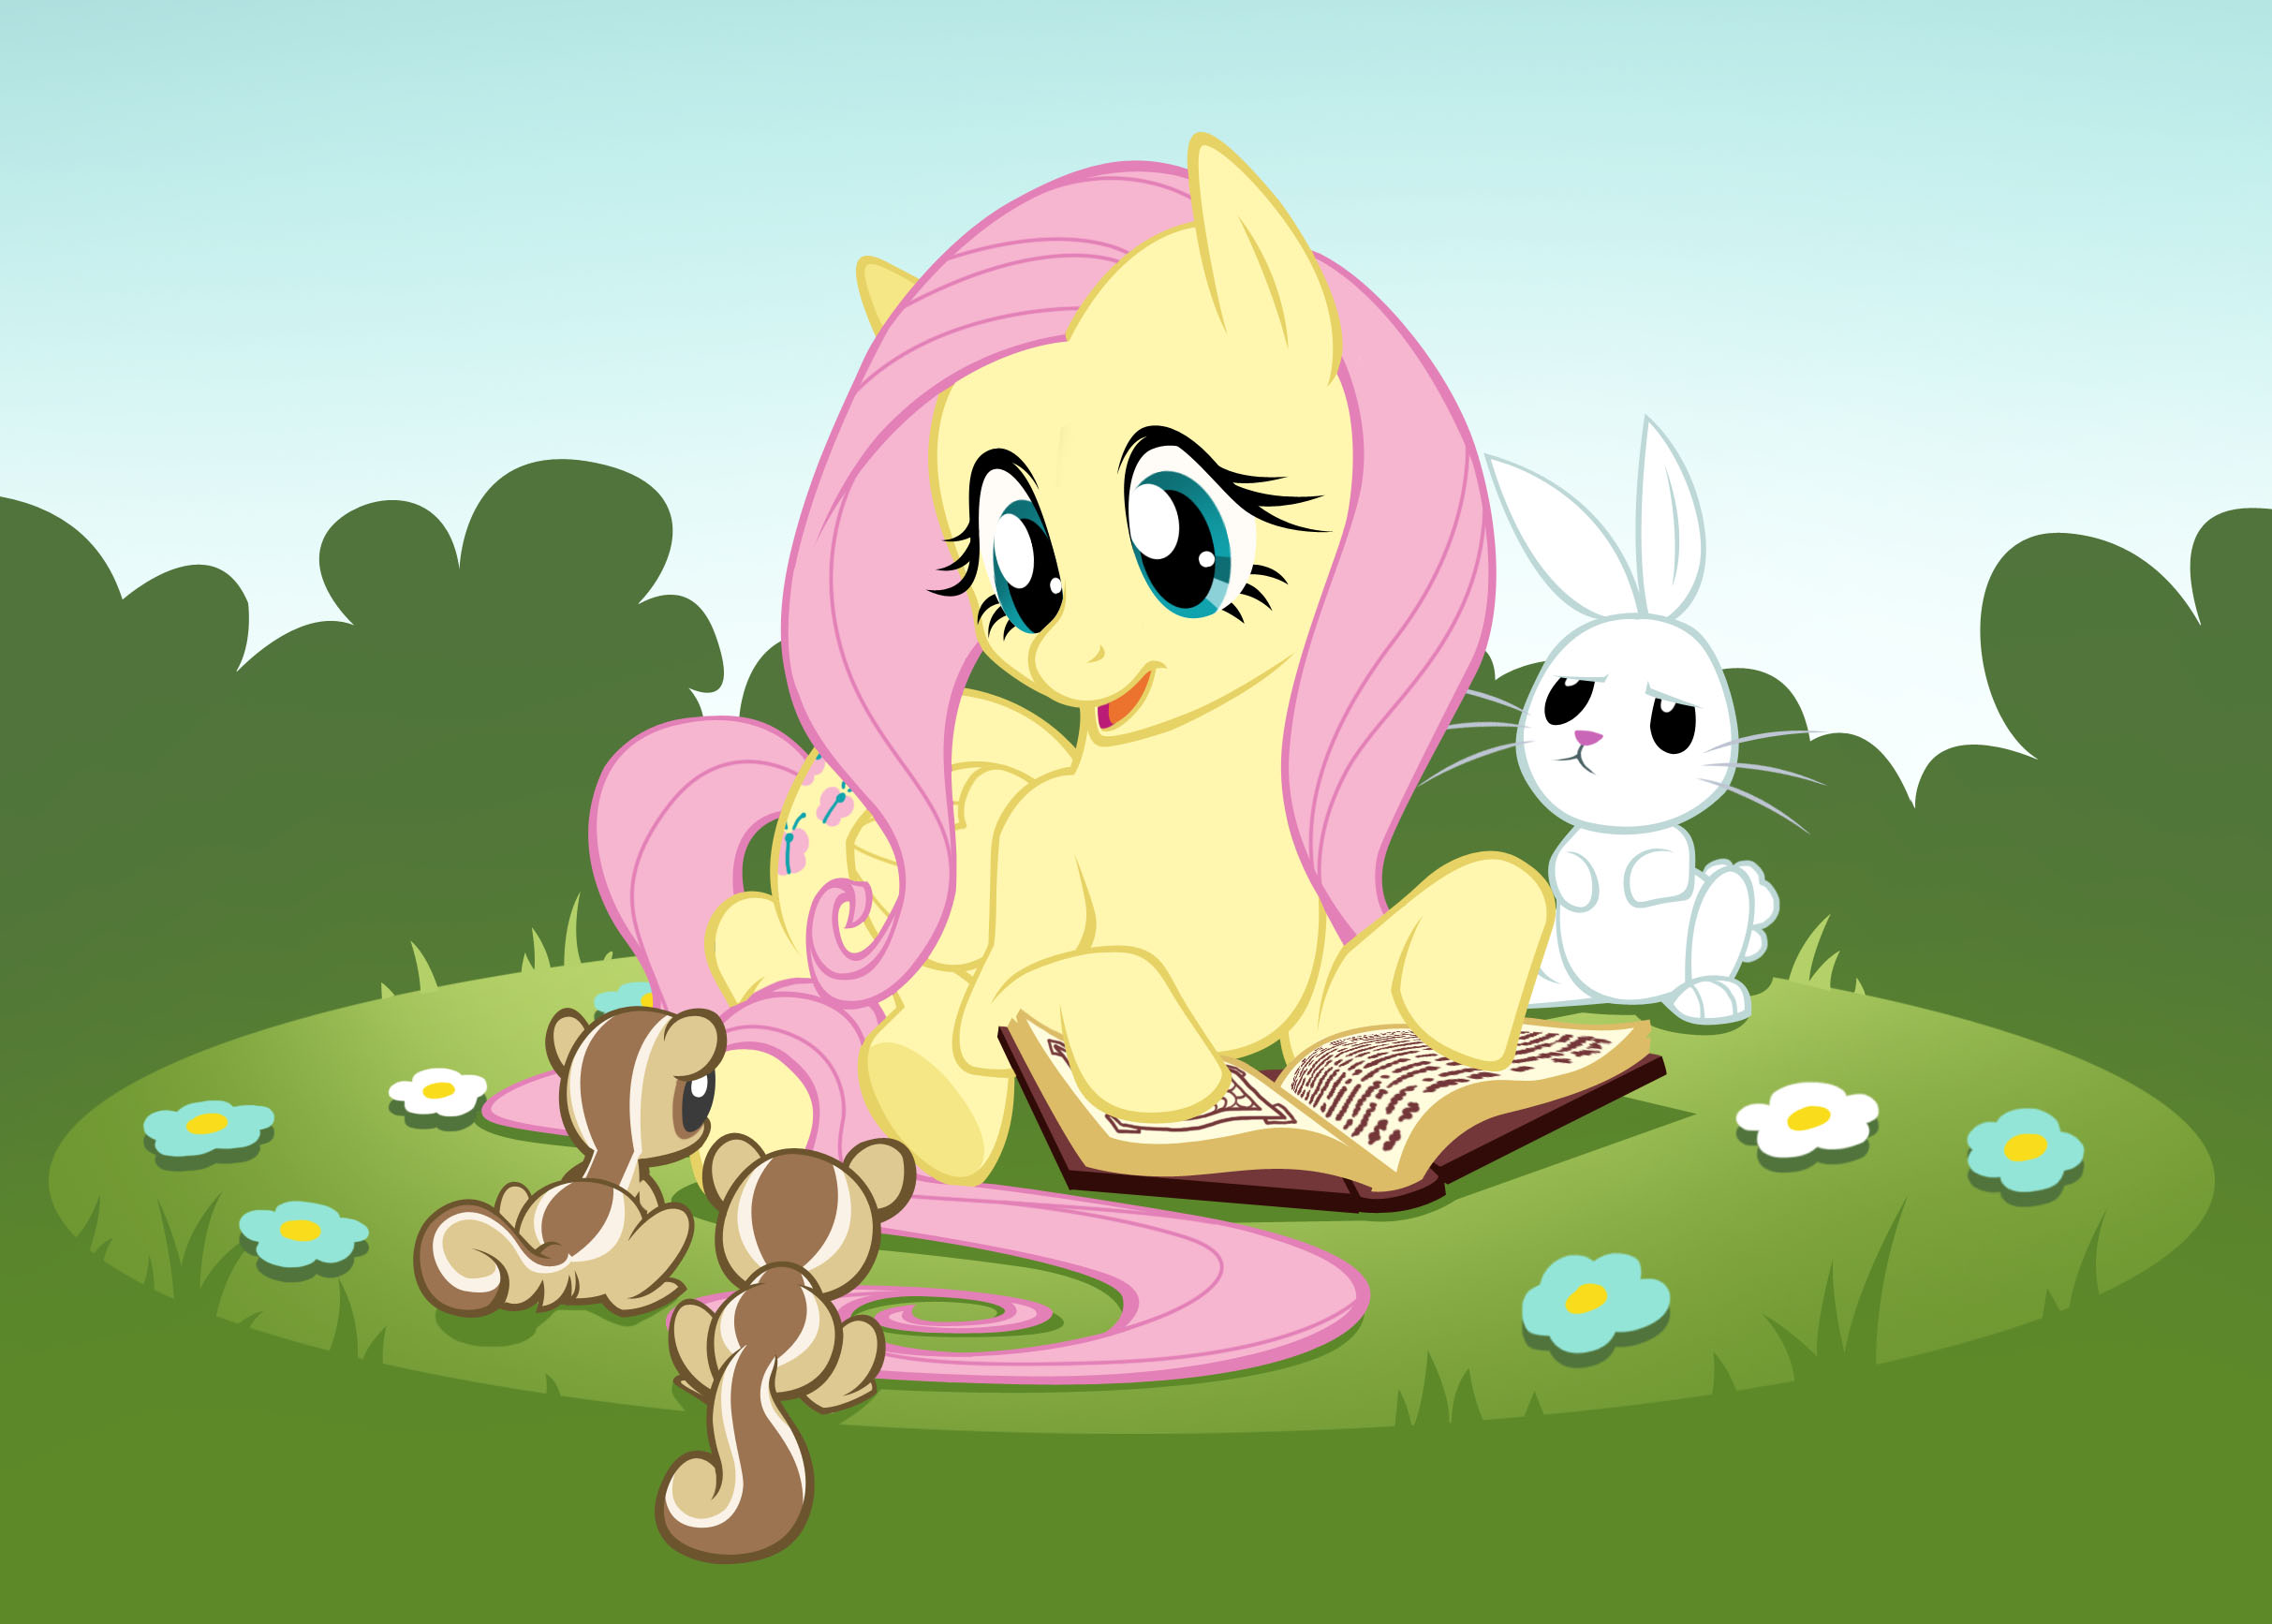 Storytime with Fluttershy by EvanStanley